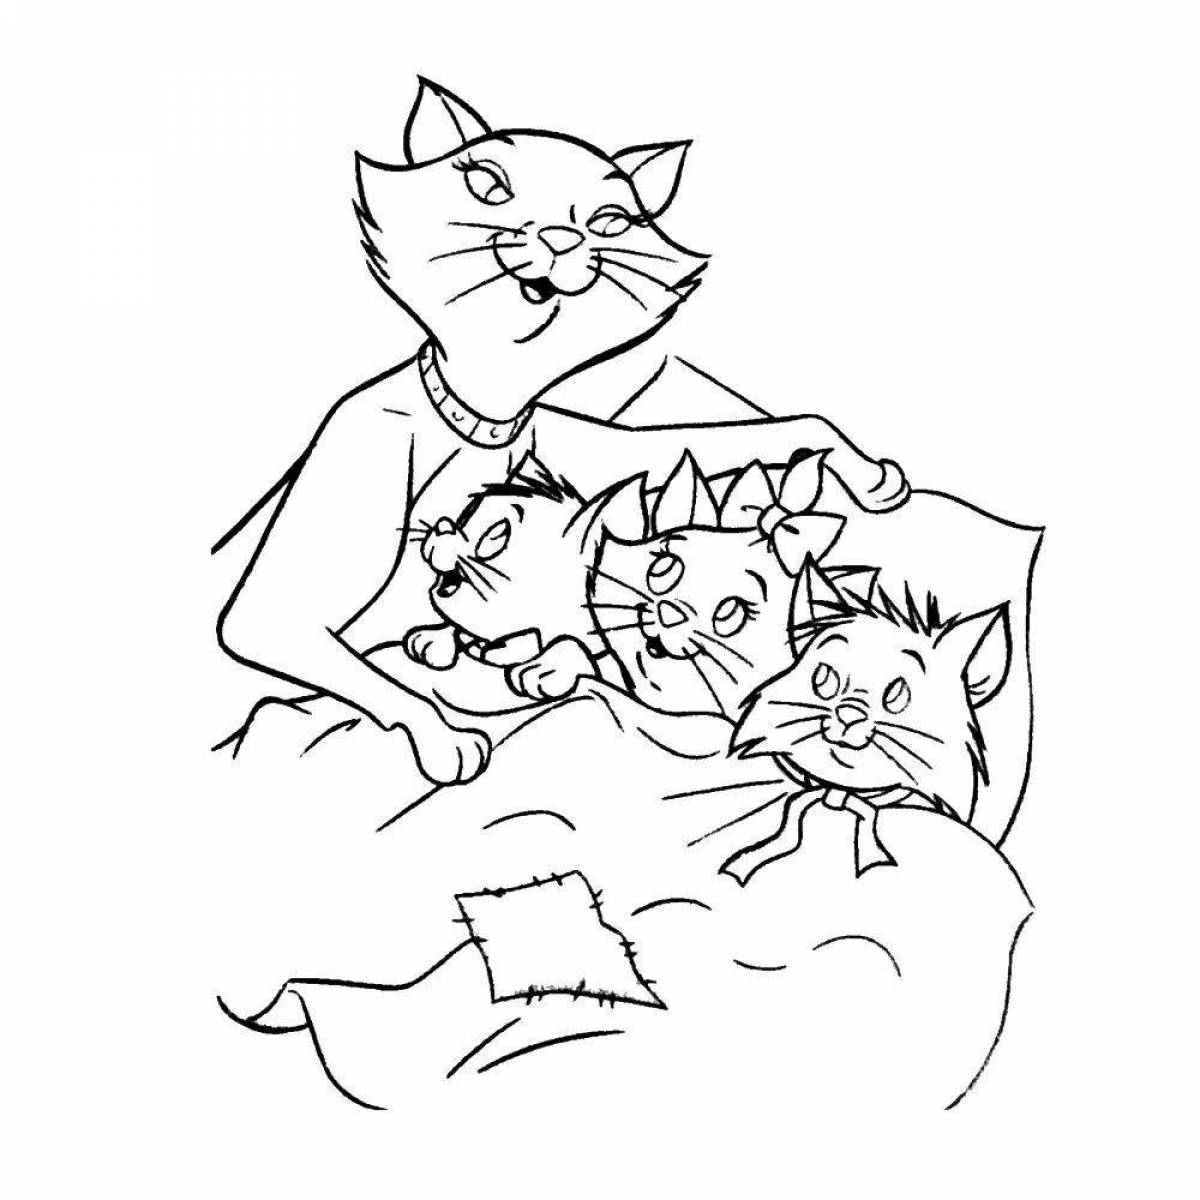 Coloring page of a playful cat family